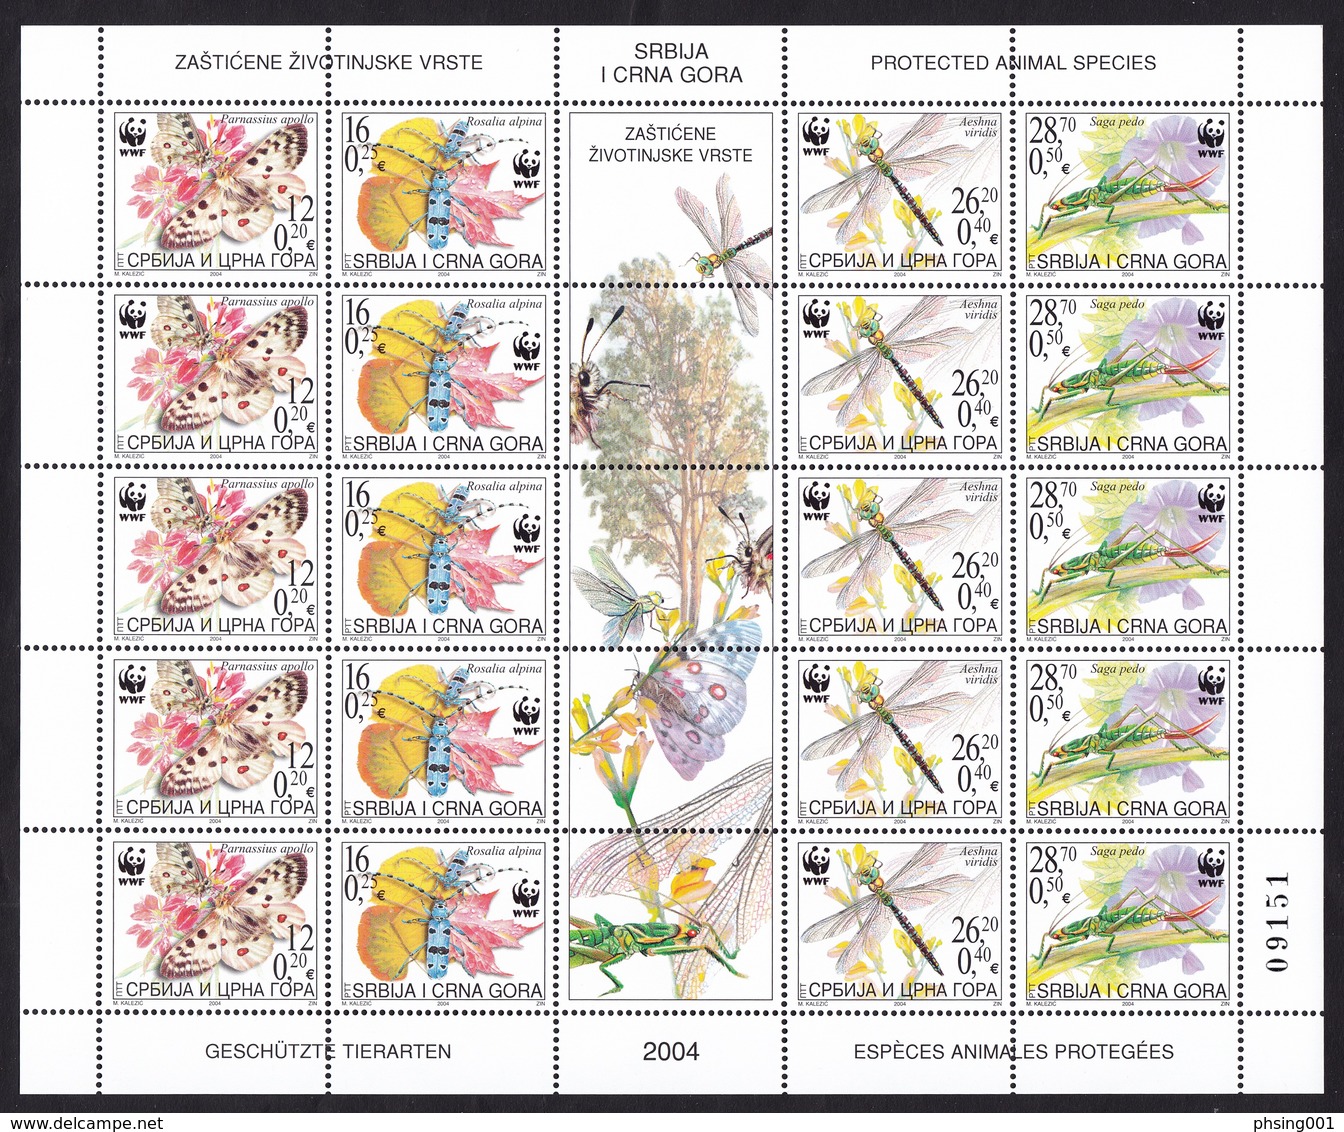 Yugoslavia 2004 WWF Insects, Butterflies, Dragonfly, Grasshopper, Fauna, Sheet Of 5 Sets In Strip MNH - Used Stamps